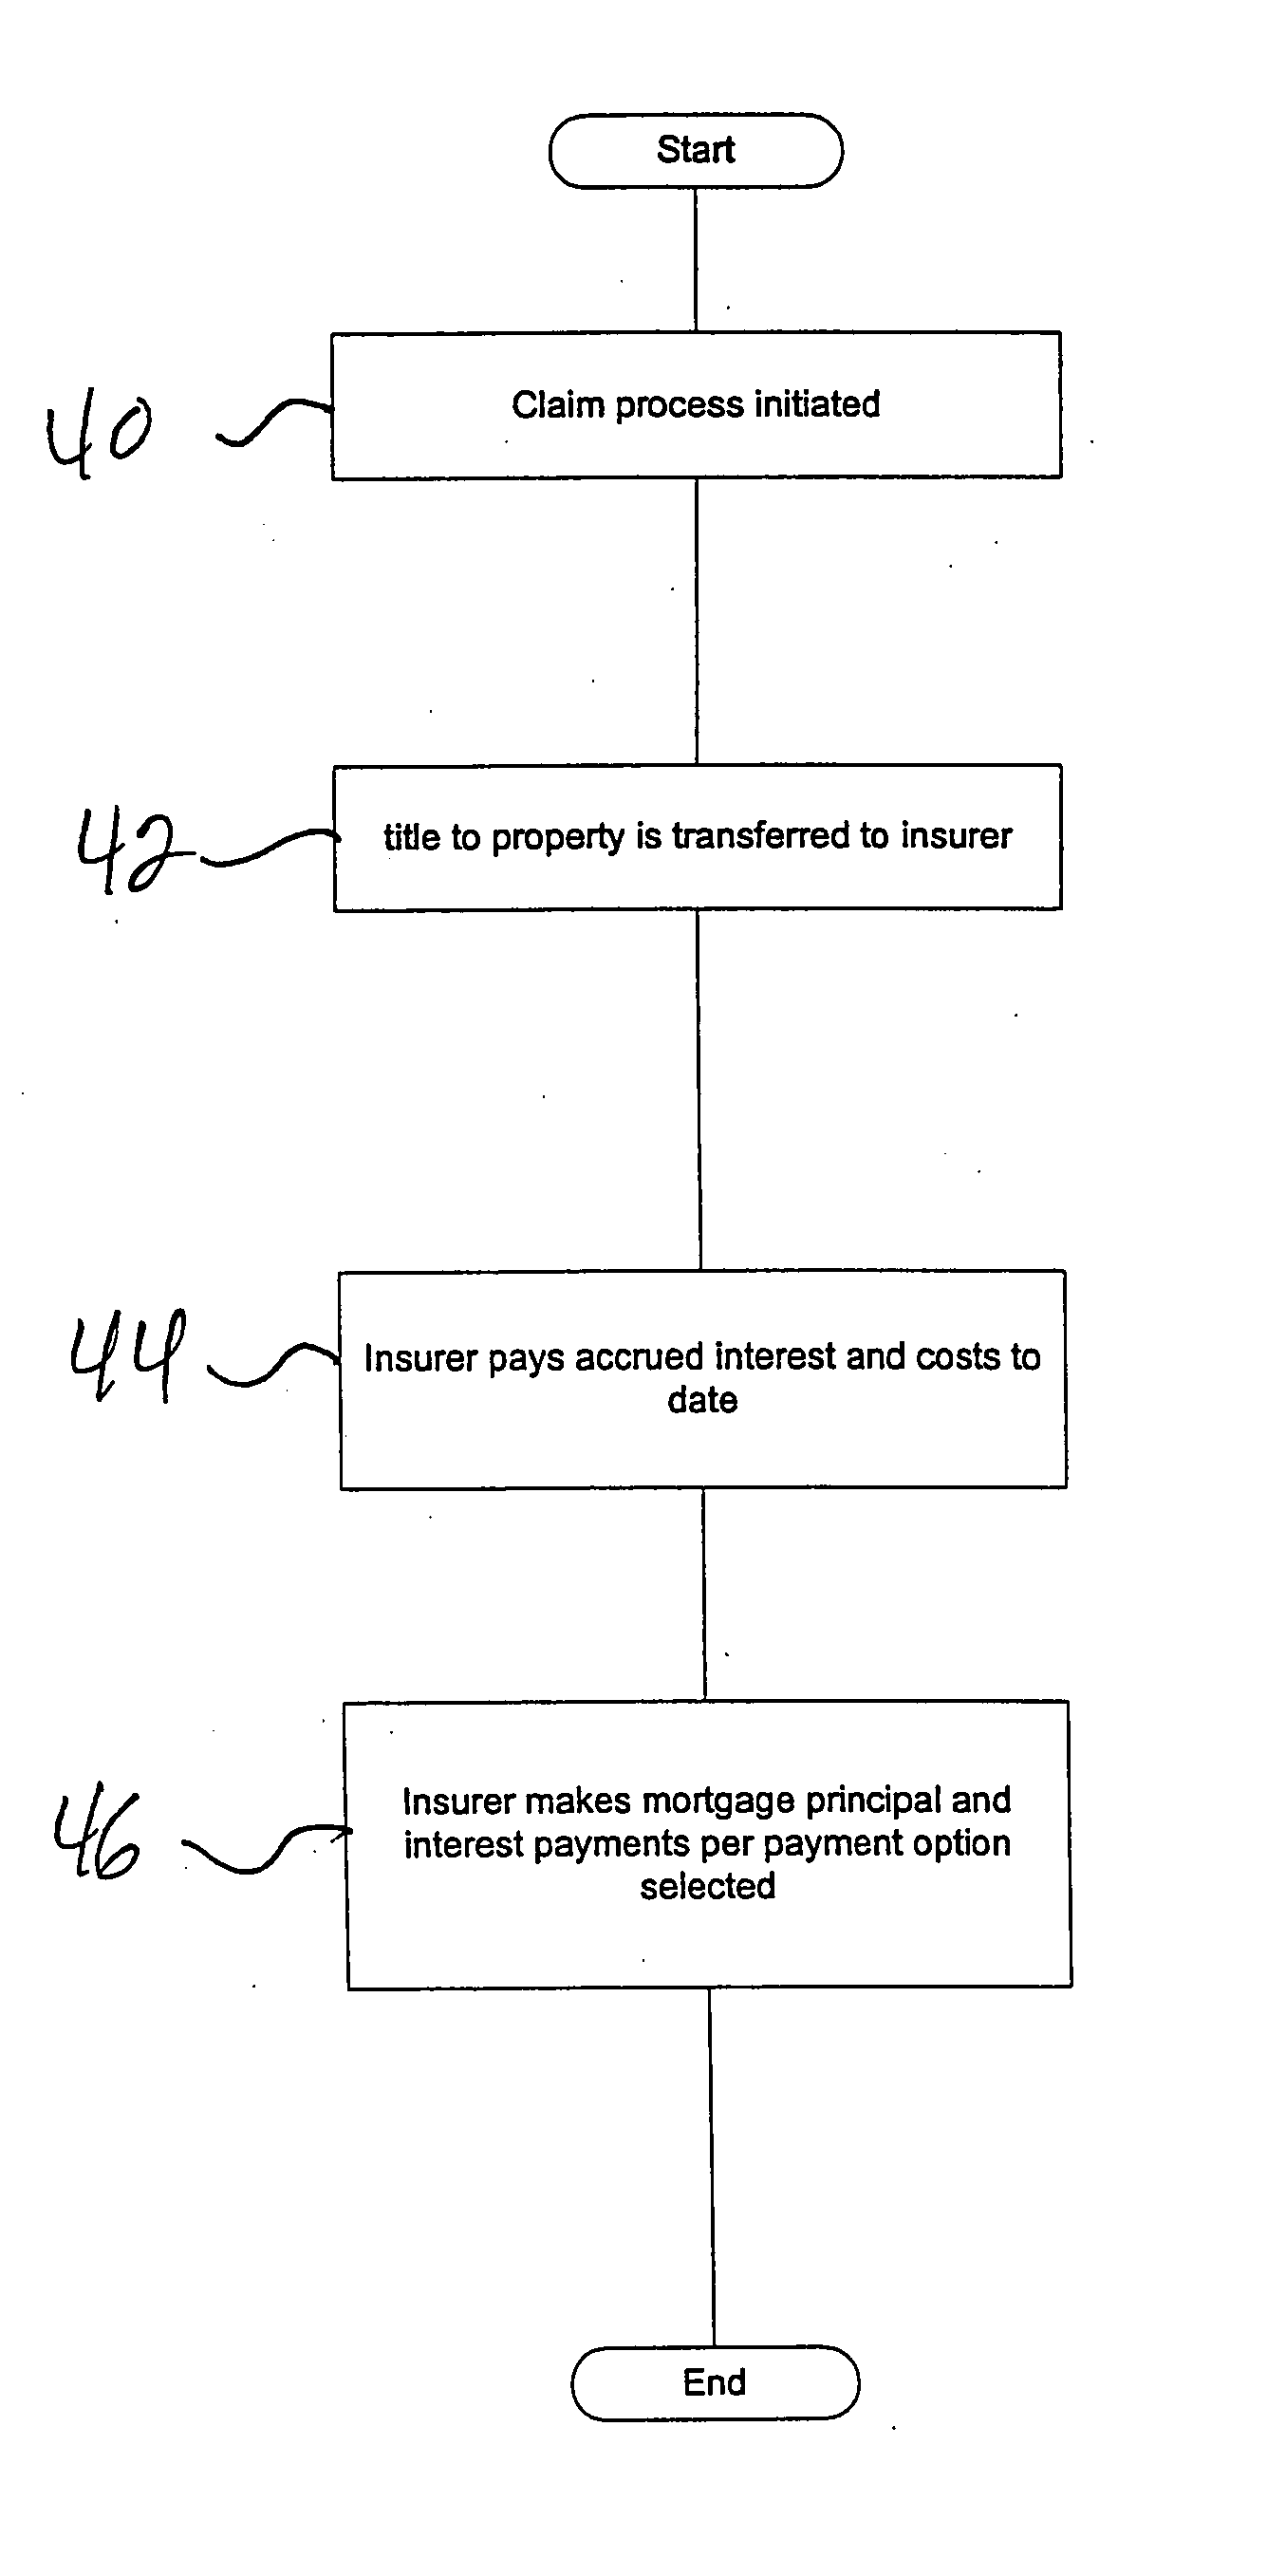 System and method for managing renewable repriced mortgage guaranty insurance